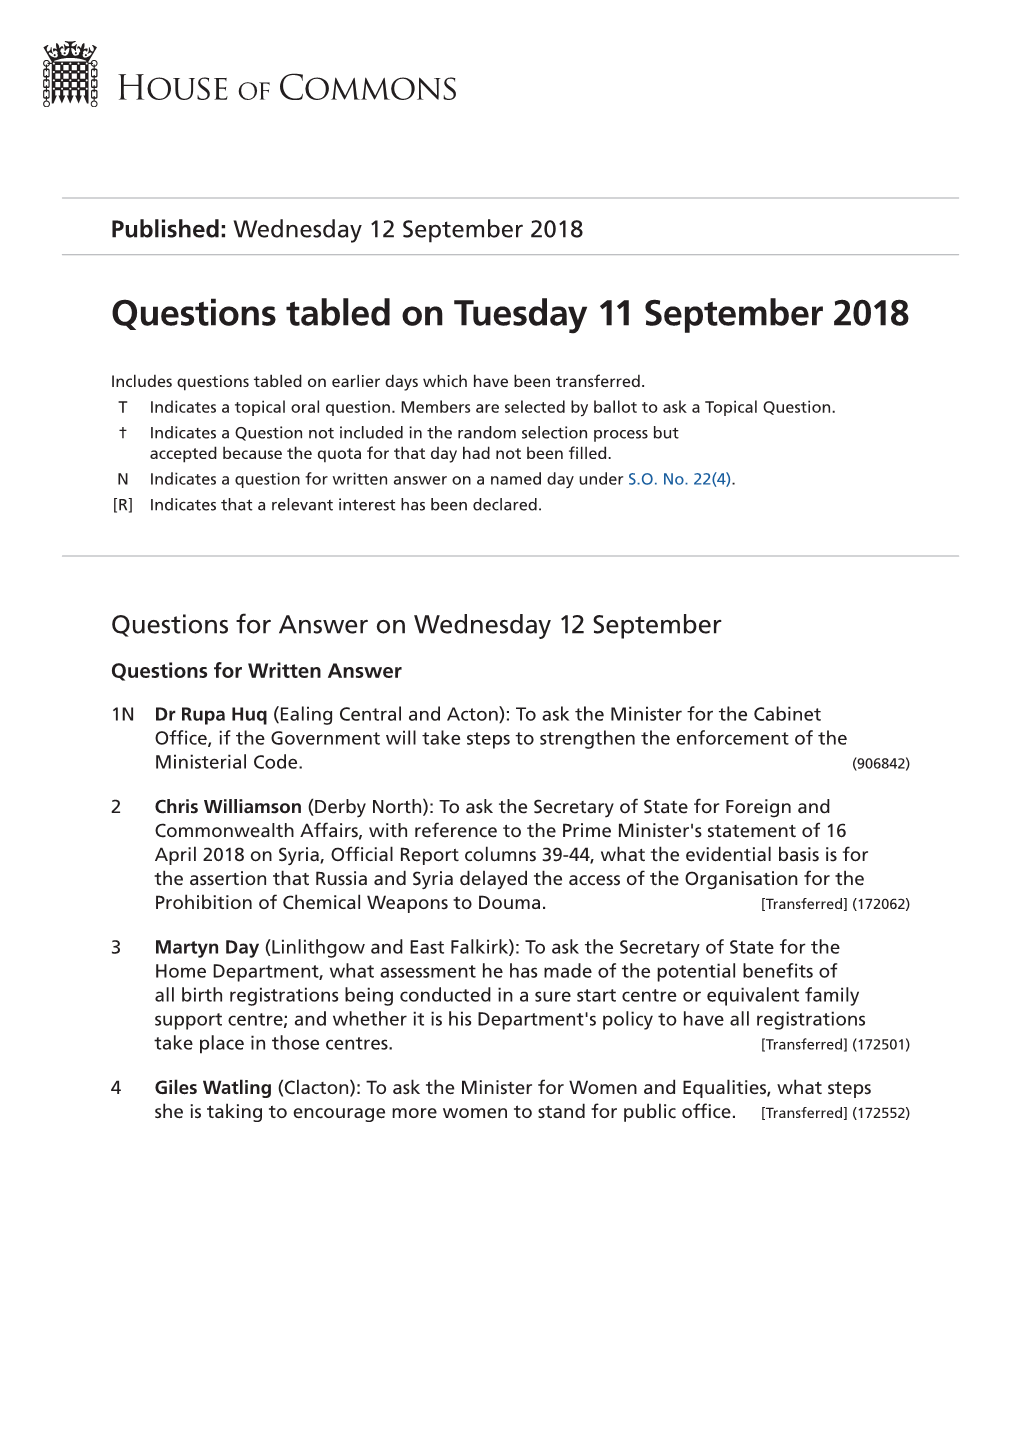 Questions Tabled on Tue 11 Sep 2018